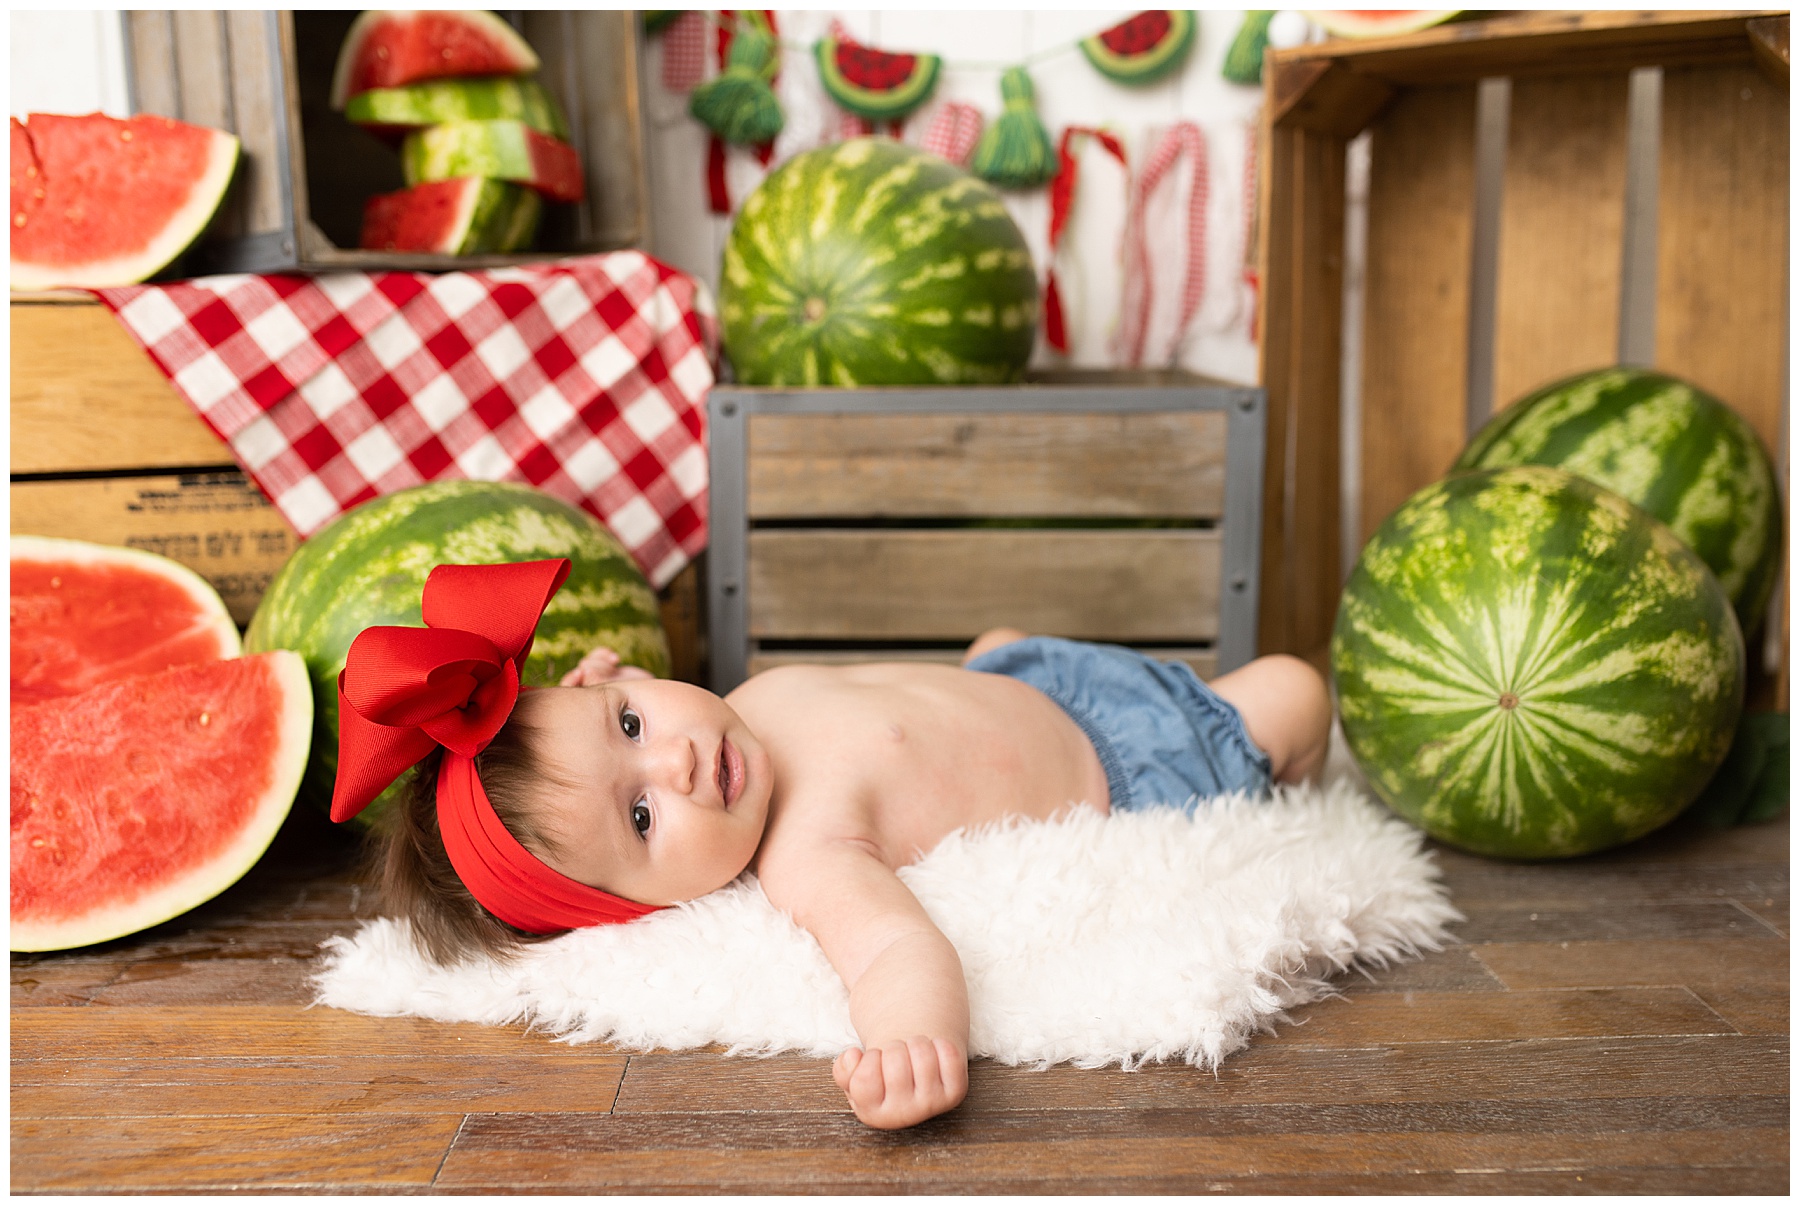 watermelon themed photo session for the baby girl